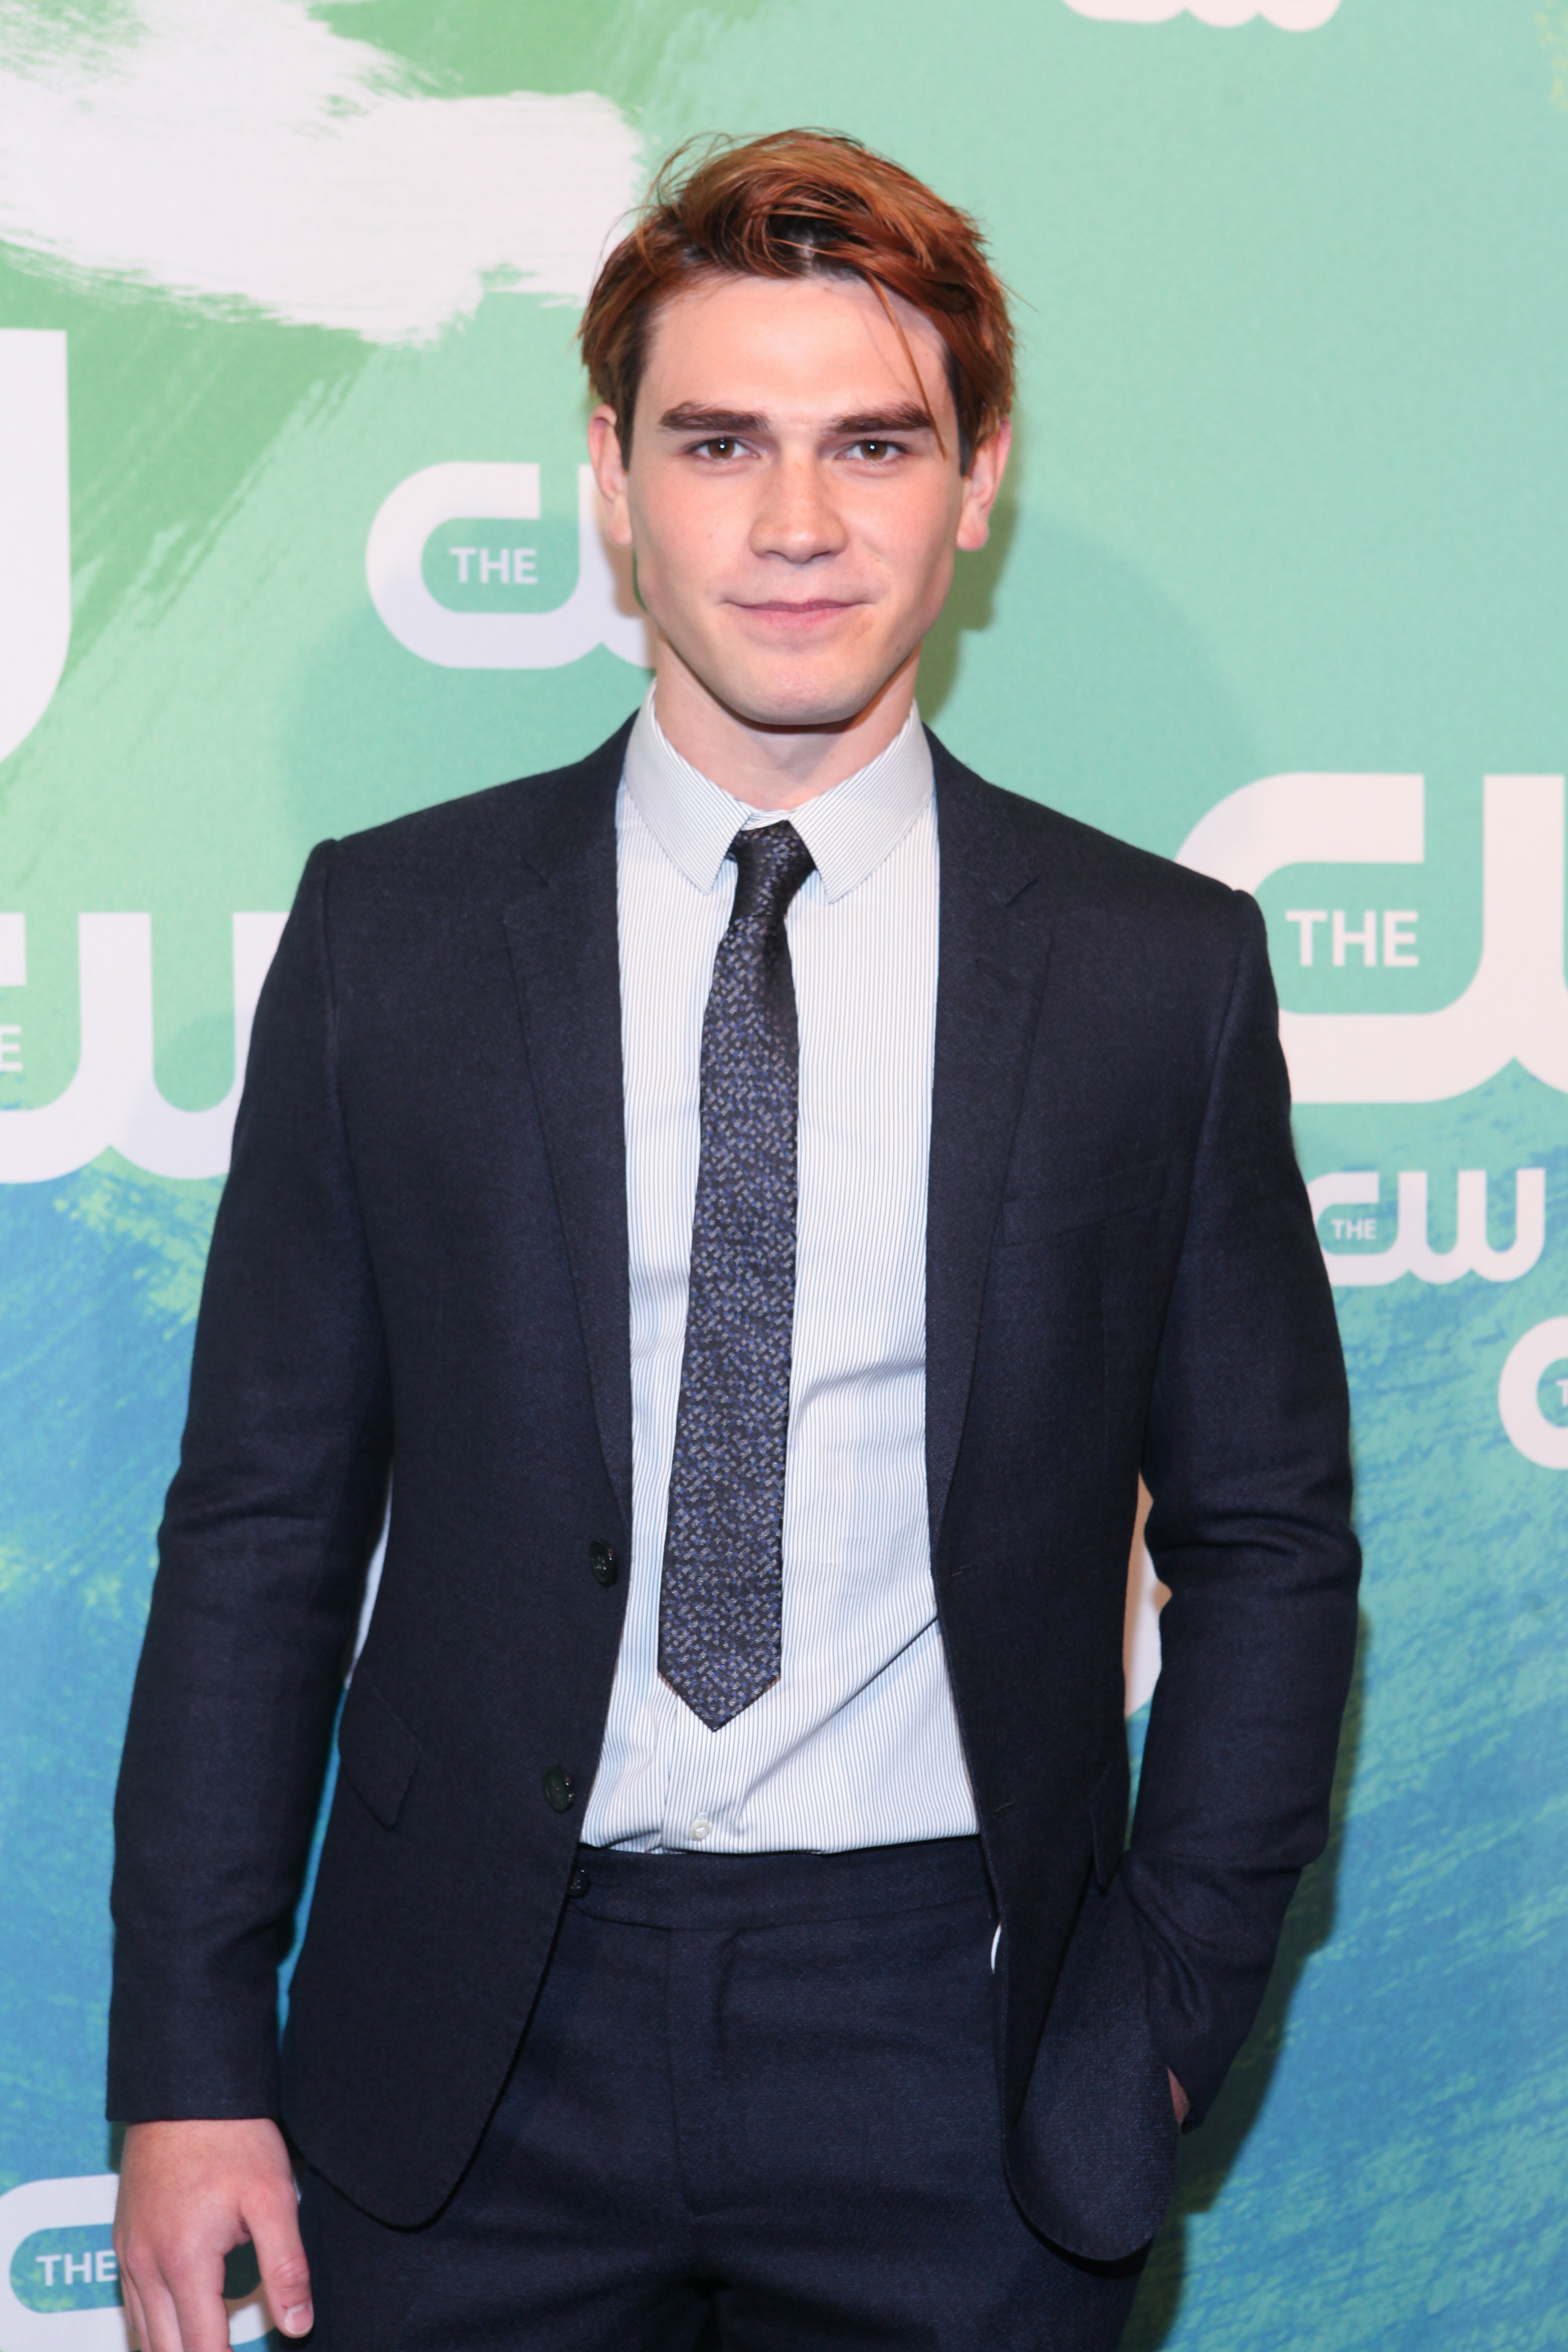 Closeup of KJ Apa on the red carpet in a suit and tie